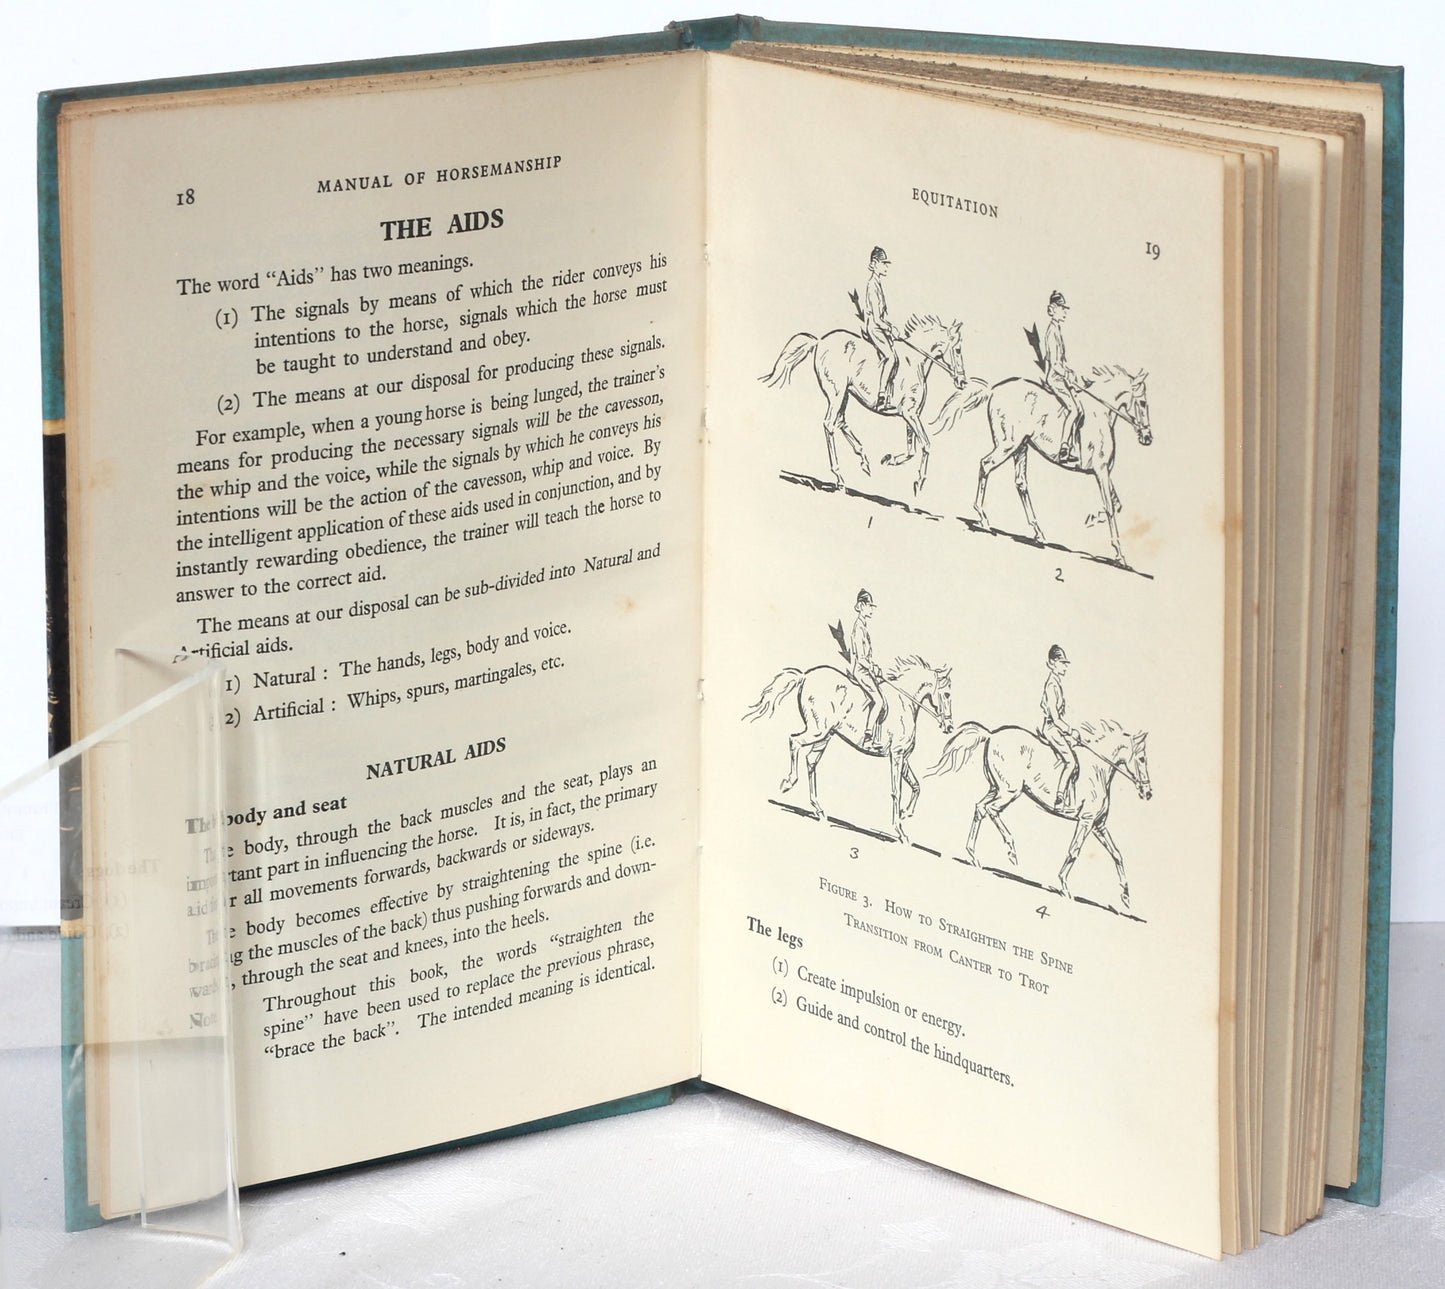 The Manual of Horsemanship of the BHS and the Pony Club, 5th Ed 1962